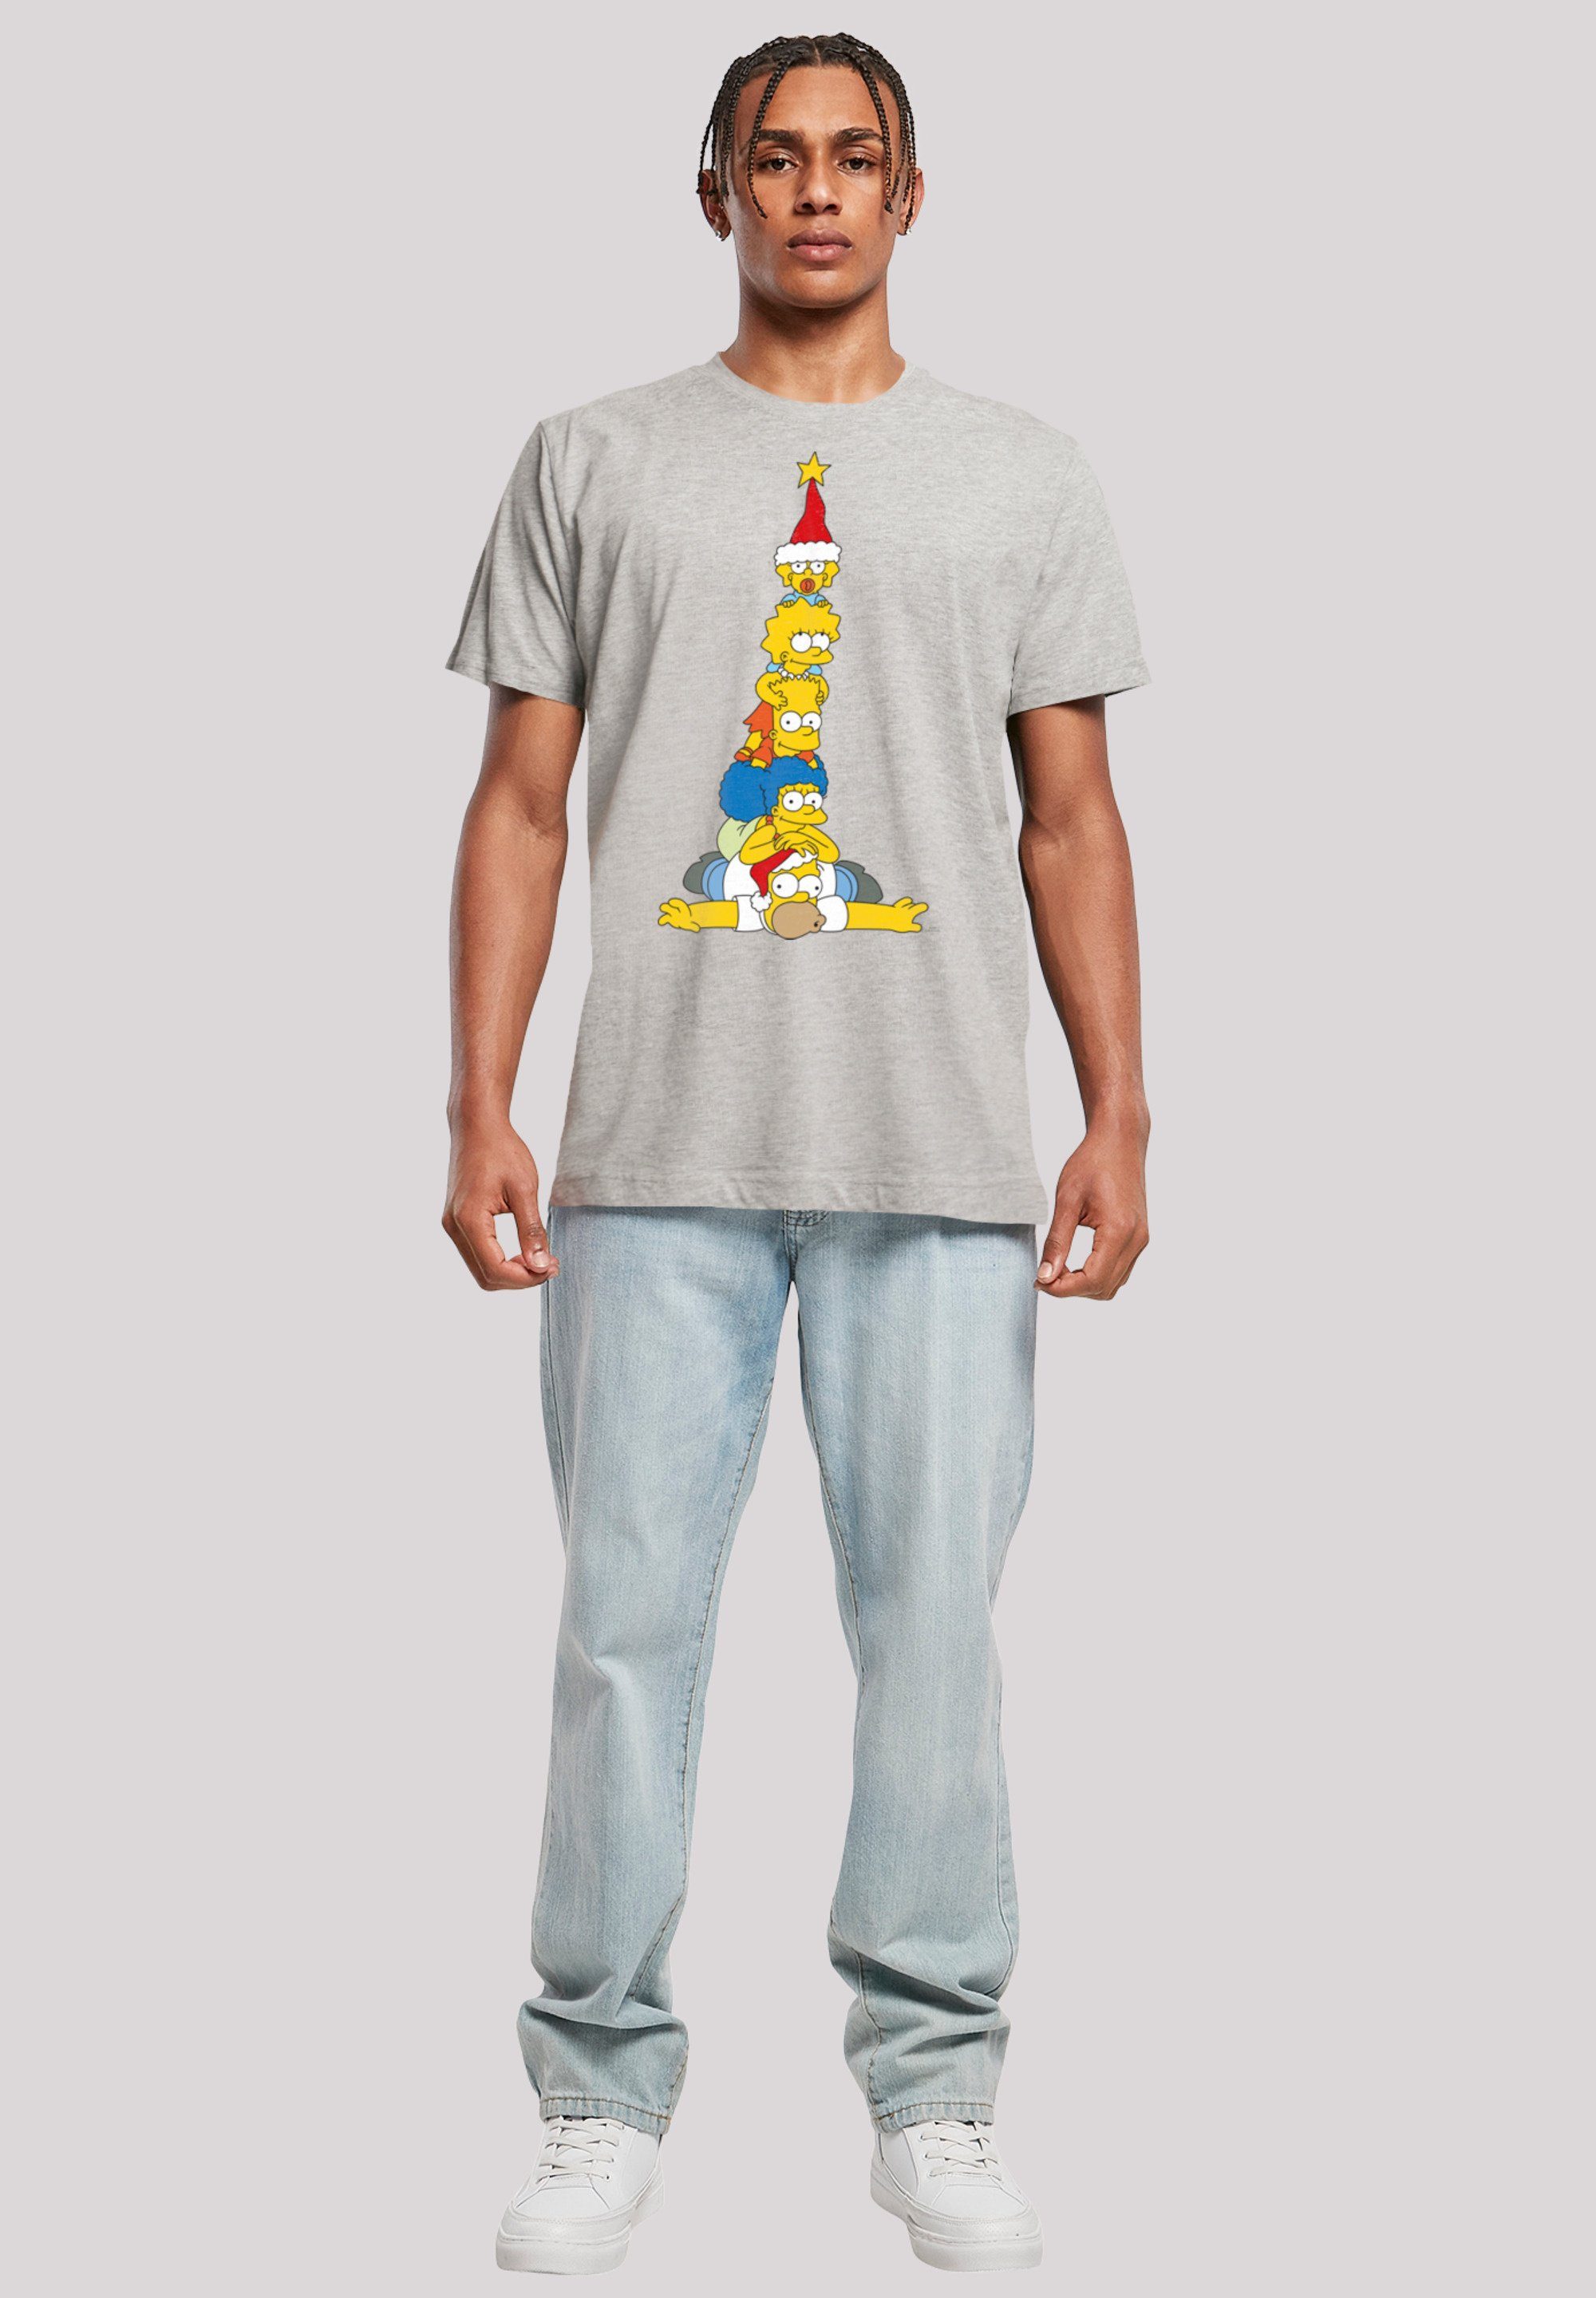 F4NT4STIC T-Shirt The Simpsons heather grey Print Weihnachtsbaum Family Christmas